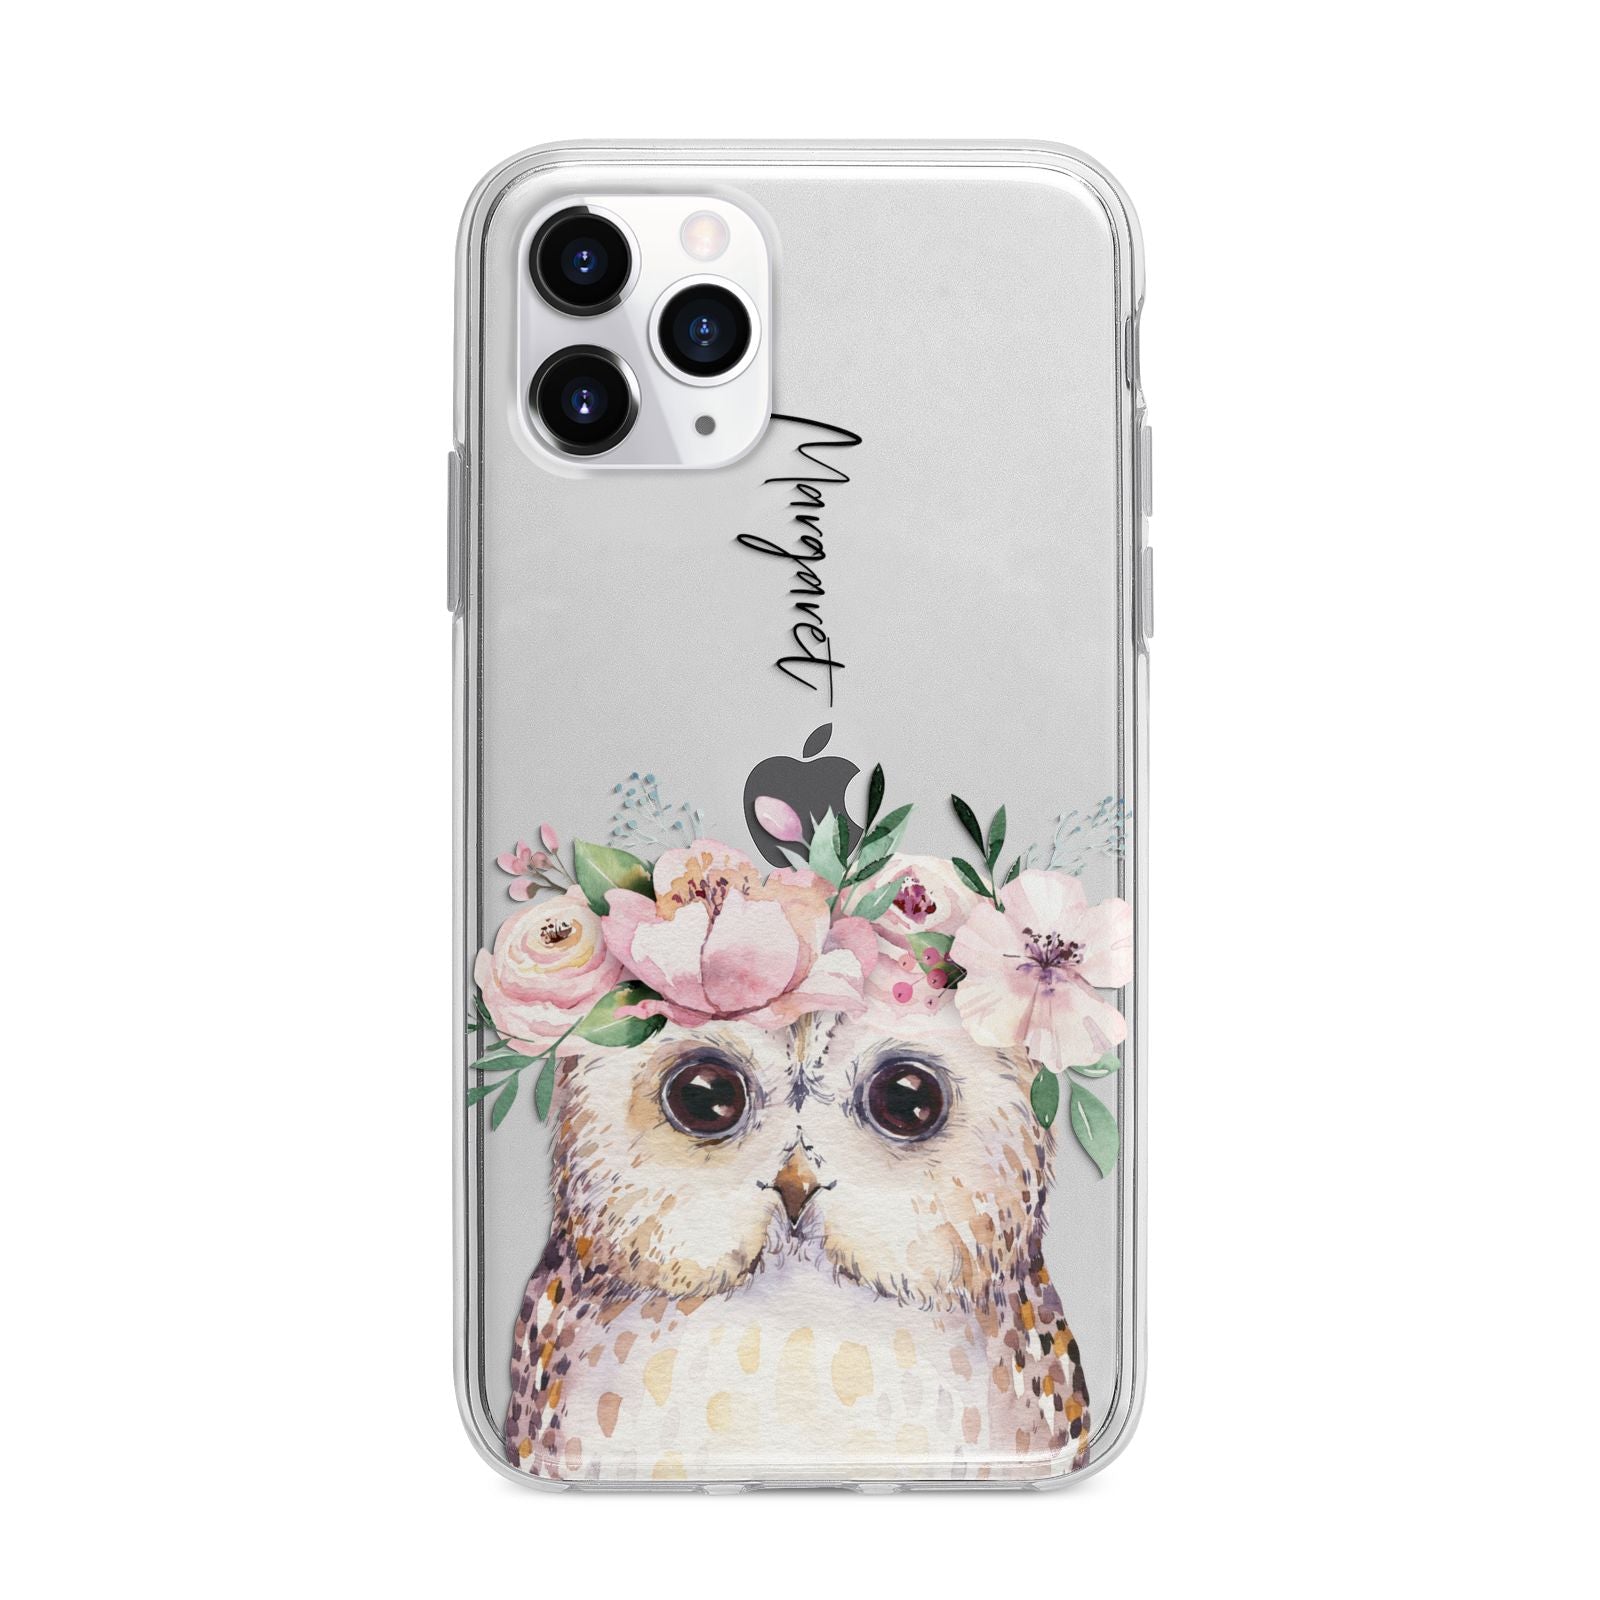 Personalised Name Owl Apple iPhone 11 Pro in Silver with Bumper Case